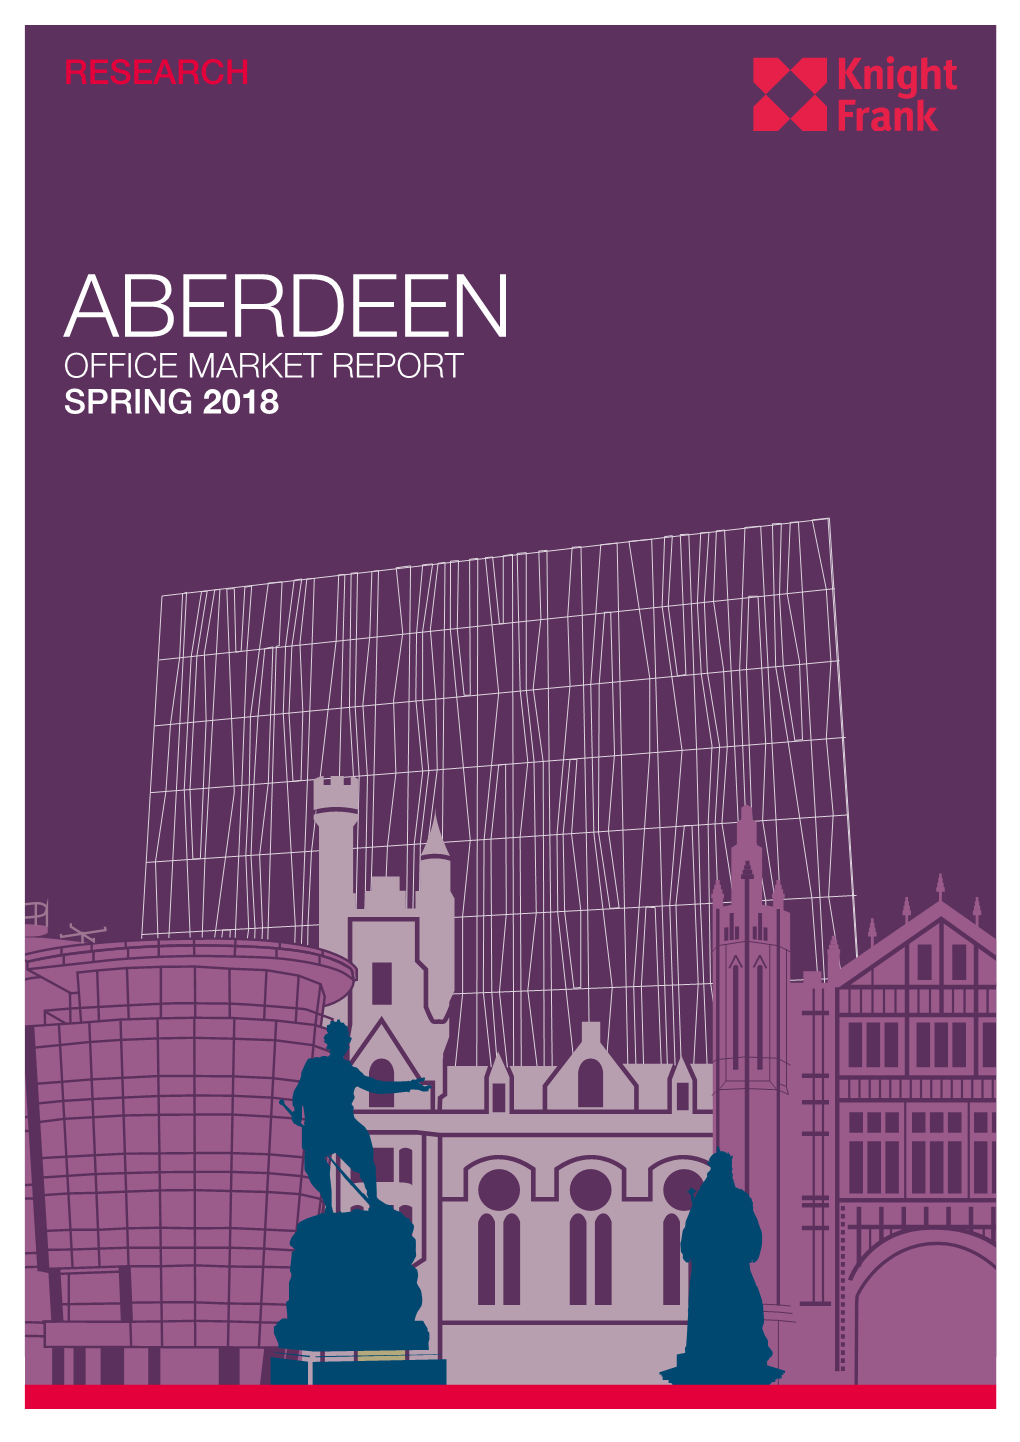 ABERDEEN OFFICE MARKET REPORT SPRING 2018 ECONOMIC OVERVIEW the Aberdeen Economy Enters 2018 with Cause for Guarded Optimism